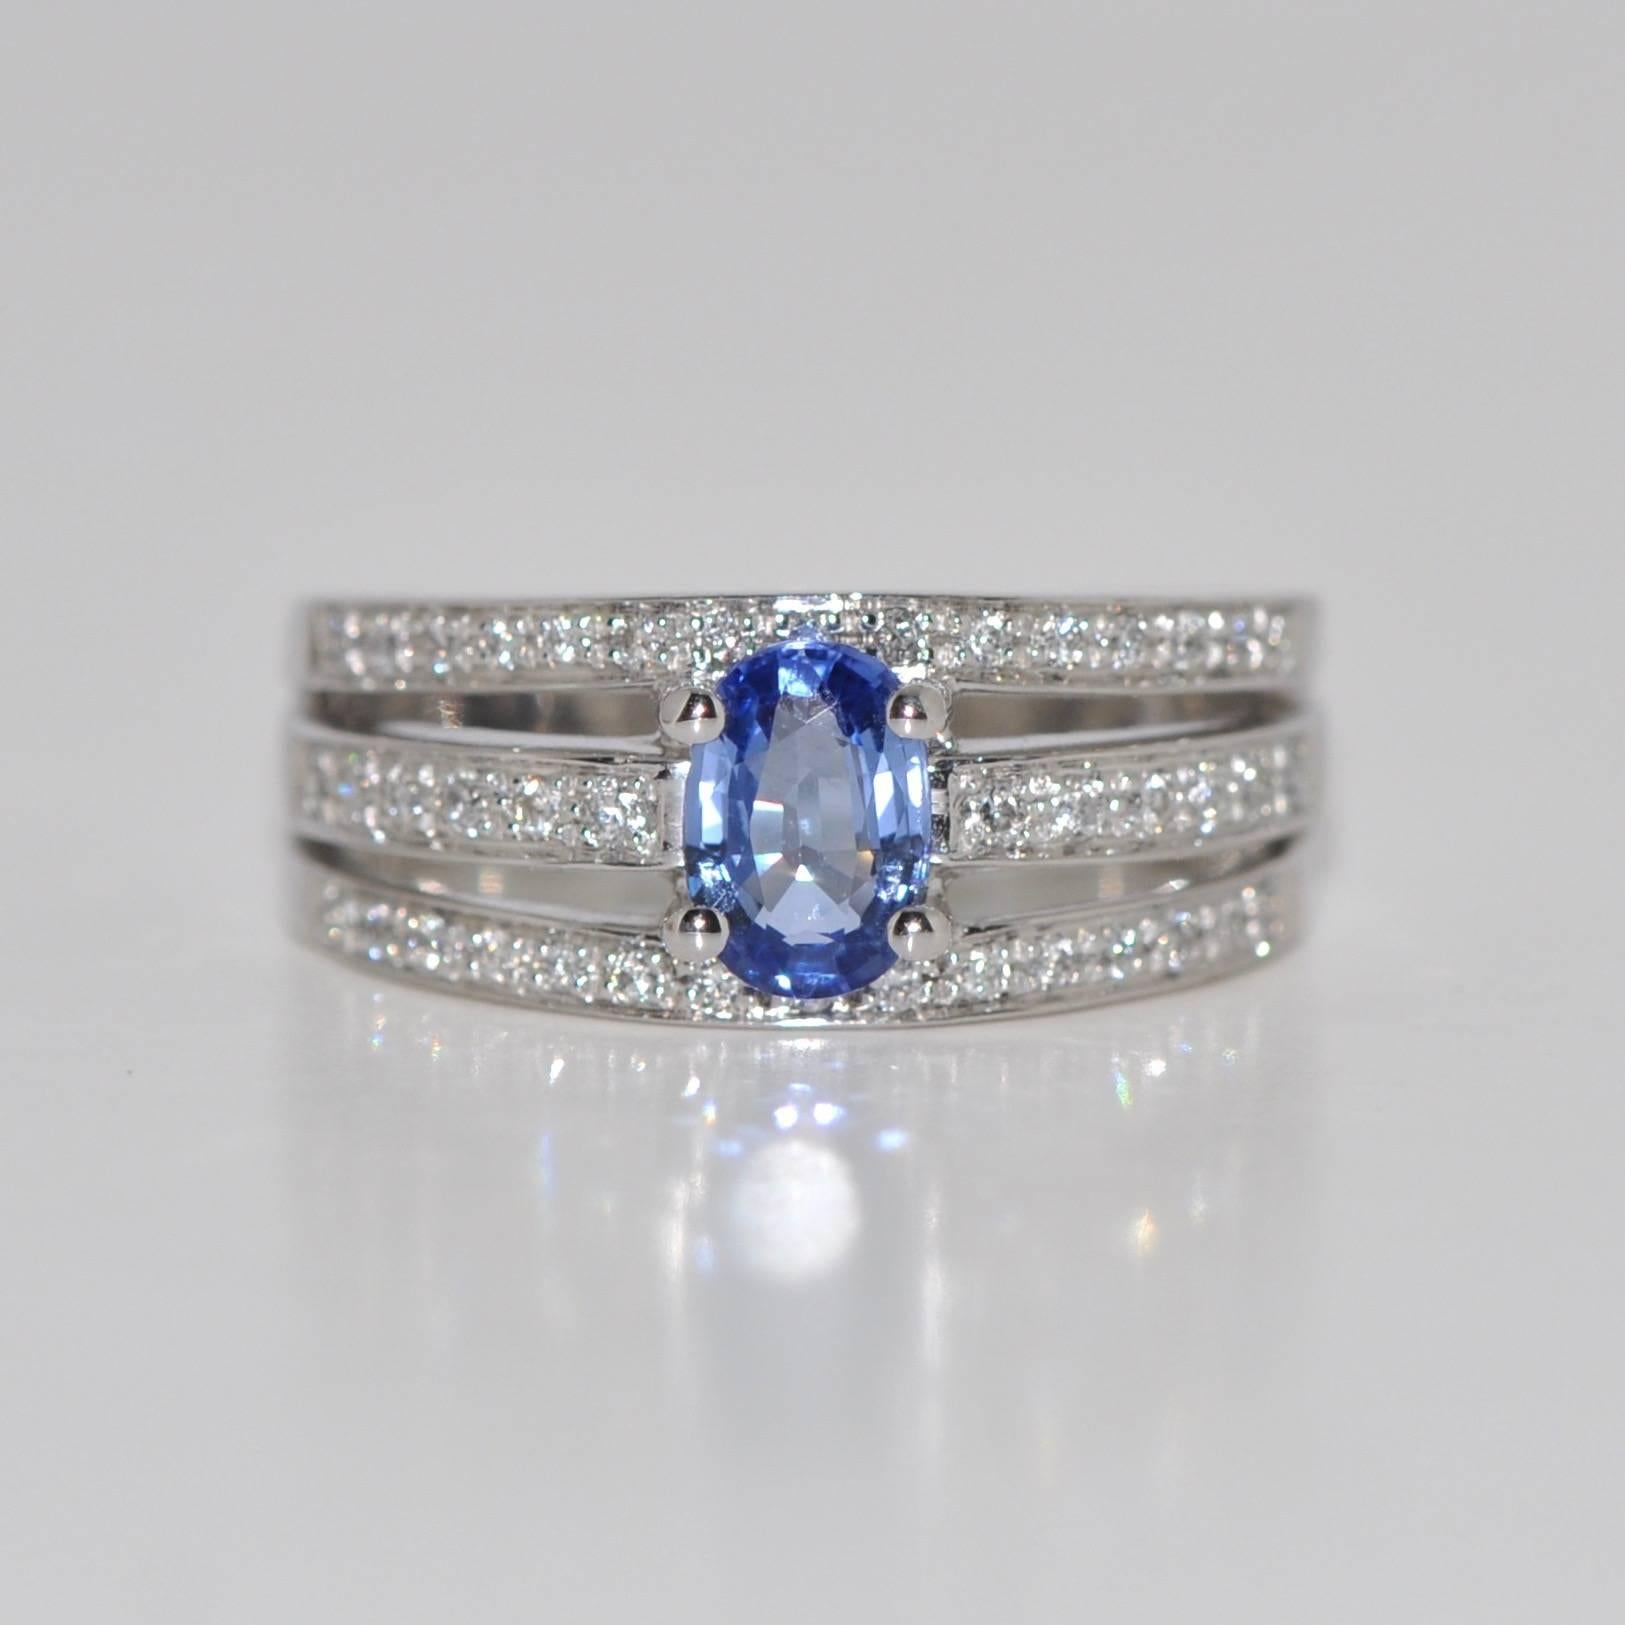 Discover this Sapphire and White Diamonds White Gold Engagement Ring.
Oval Blue Sapphire 7*5 1.00 Carat
White Diamonds 0.26 Carat
White Gold 18 Carat
French Size 53
US Size 6 1/4